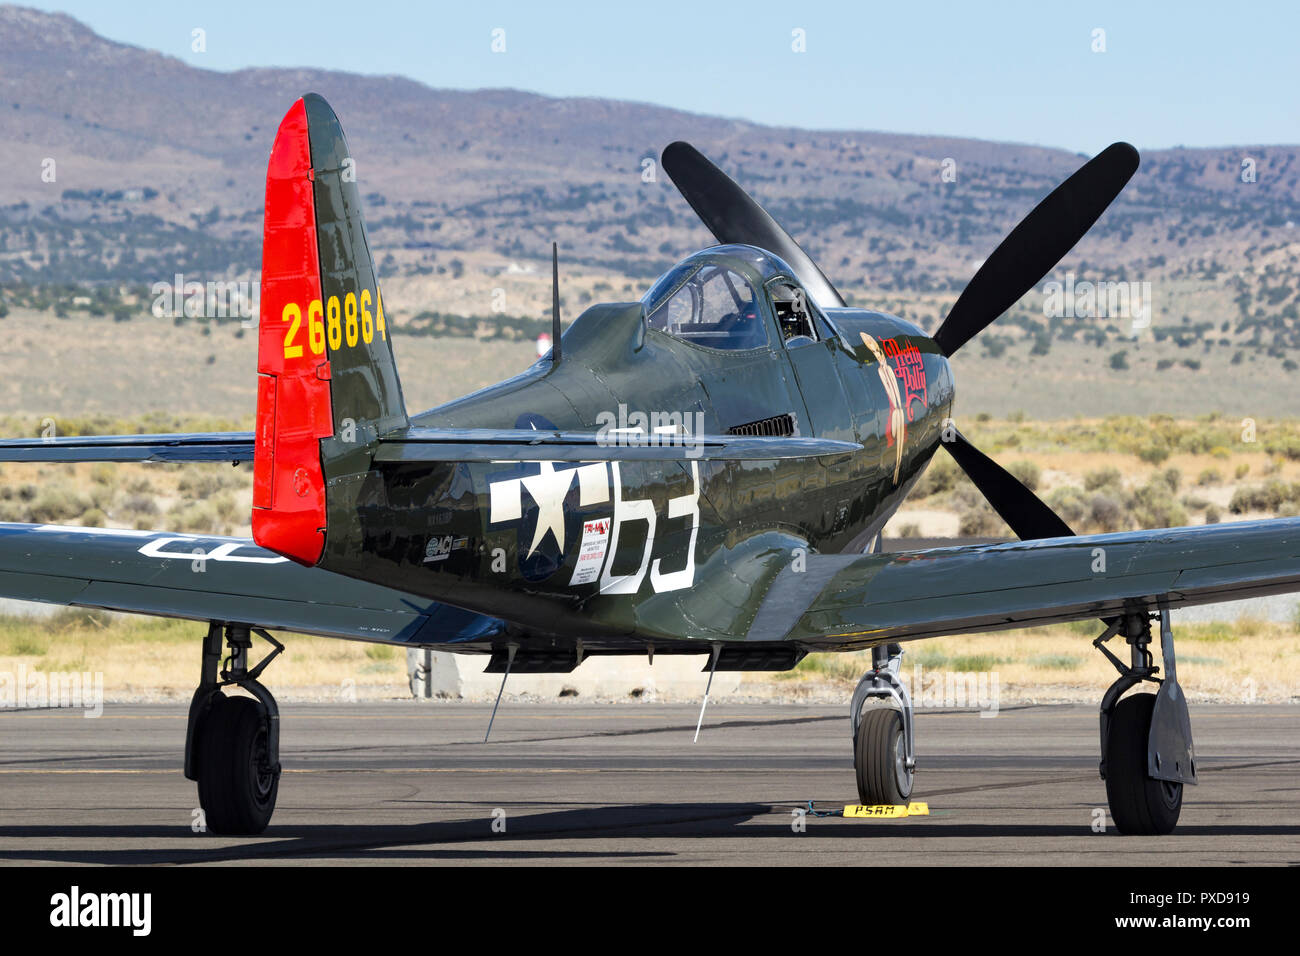 A rare P-63 King Cobra and Unlimted Air Racer 'Pretty Polly' on the ramp prior to a heat race at the 2018 Reno National Championship Air Races. Stock Photo